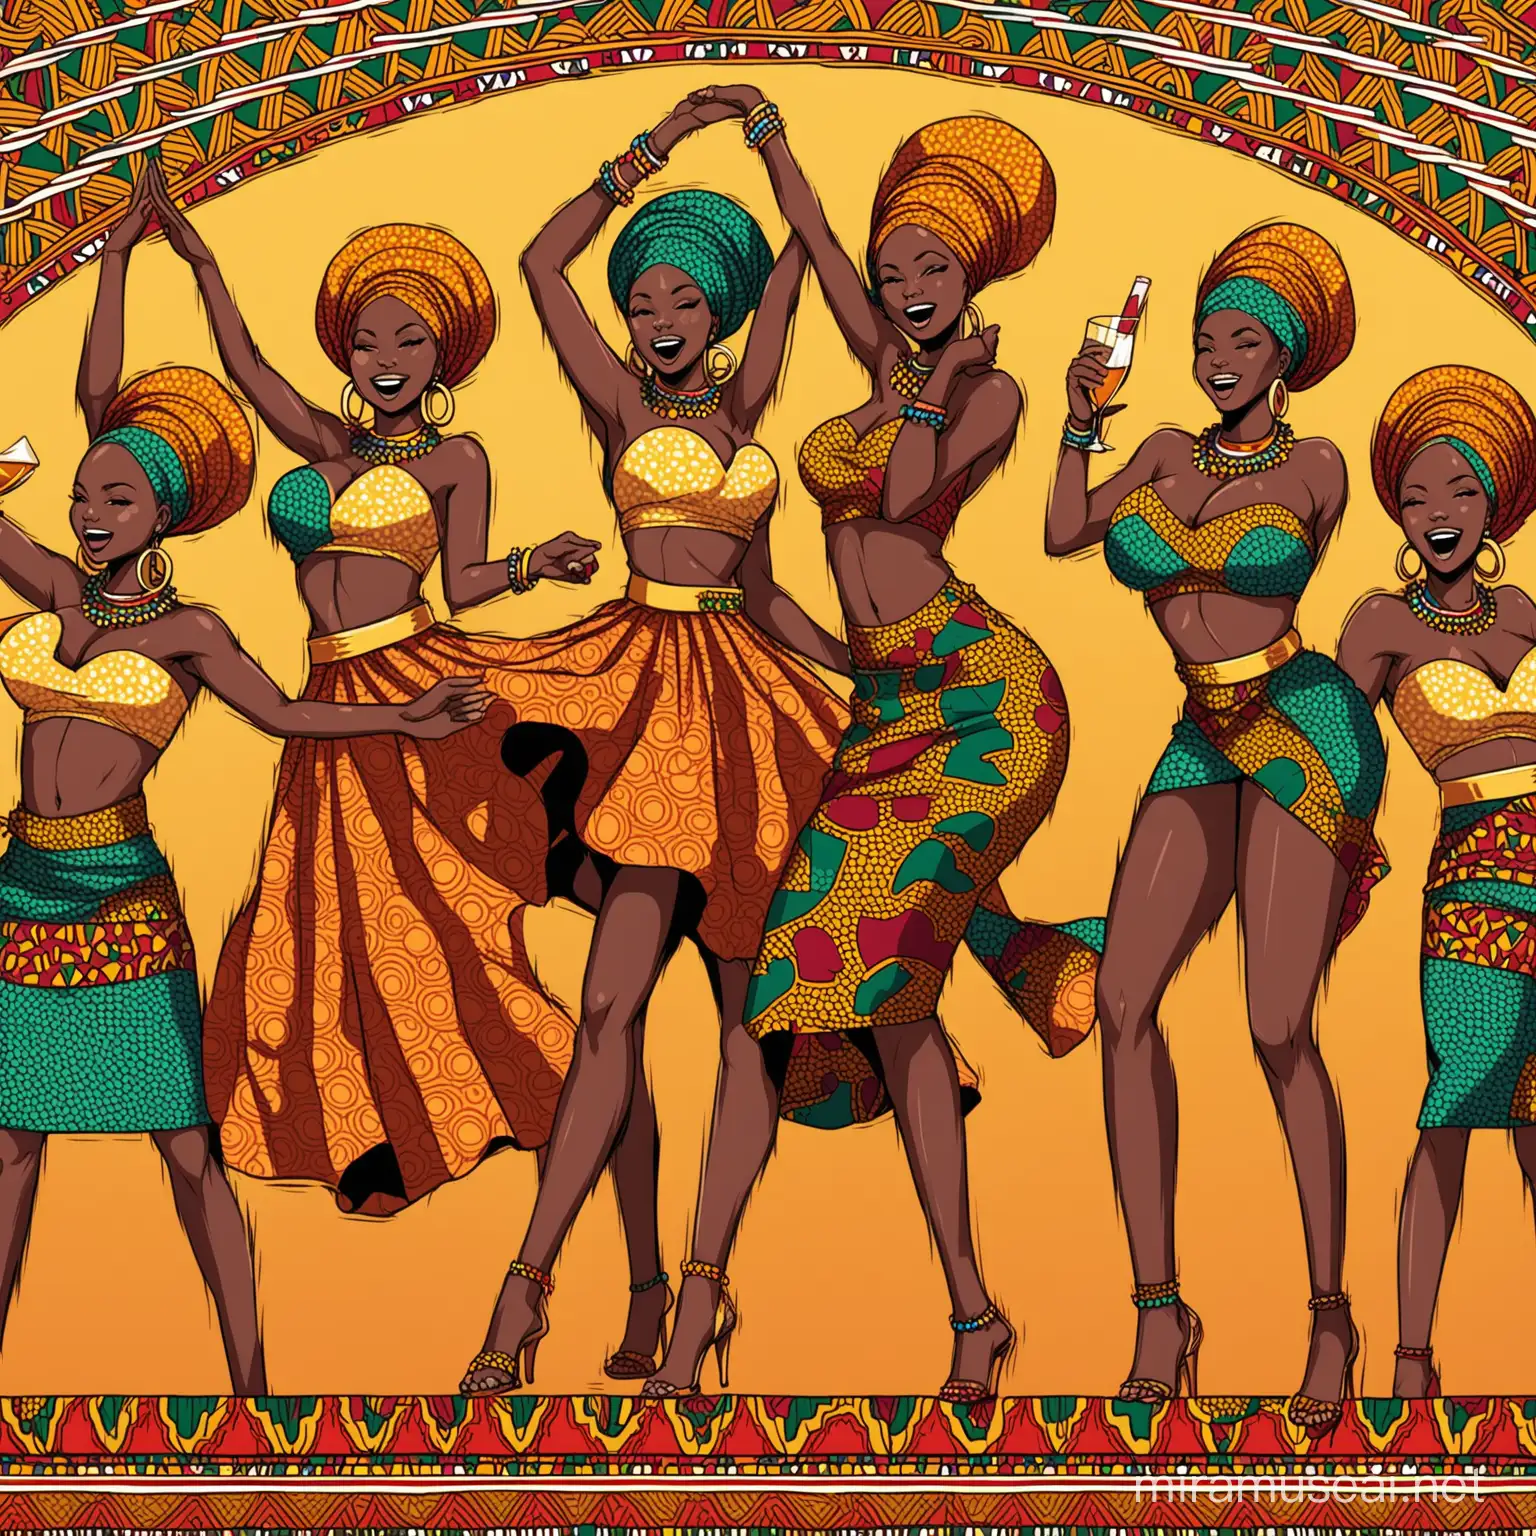 Create a song Art about enjoyment and partying infuse African prints , symbols and influences in it